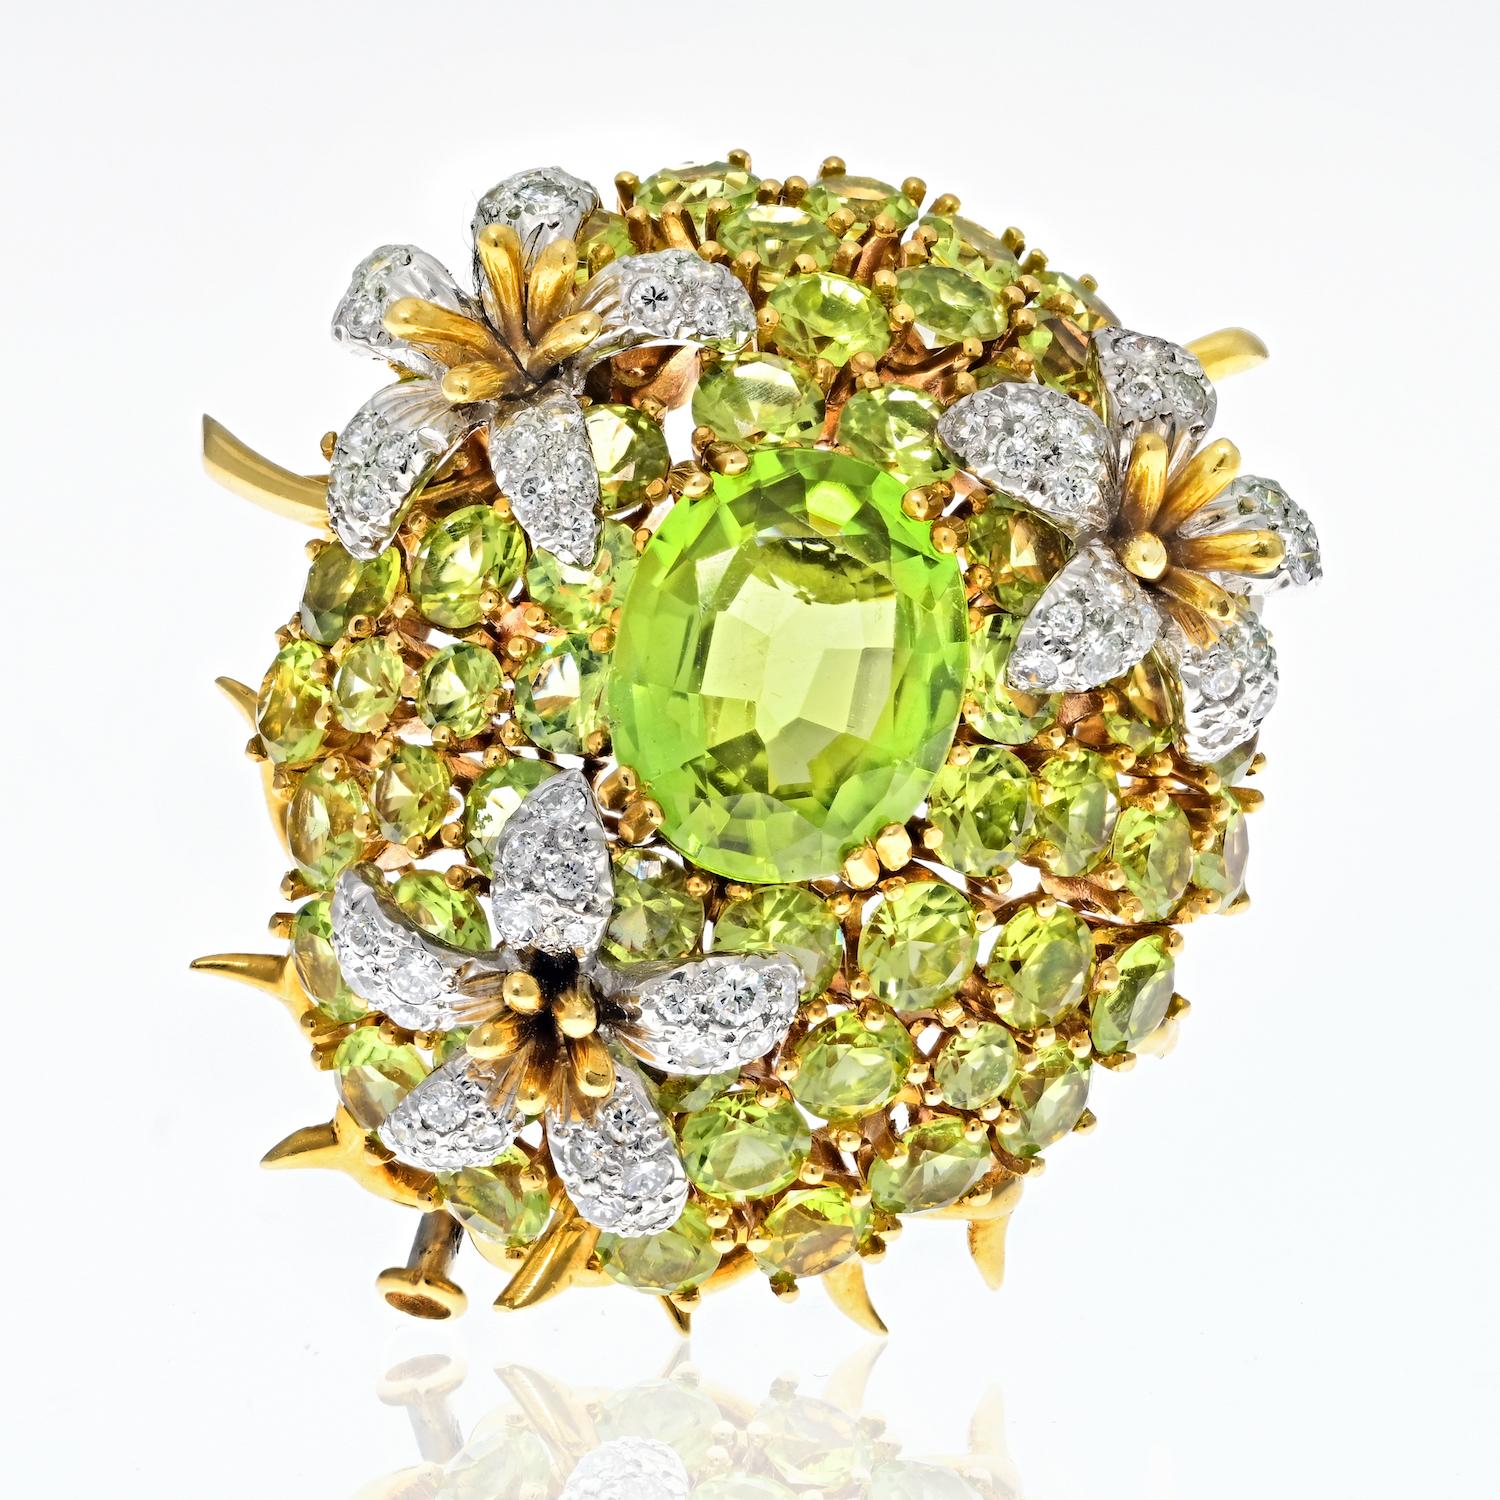 Tiffany & Co. Schlumberger Platinum & 18K Yellow Gold Oval Cut Peridot And Diamond Brooch.

Centered on an oval-shaped peridot, set within a domed surround of round peridots, embellished with three flowerheads, the petals pavé-set with round